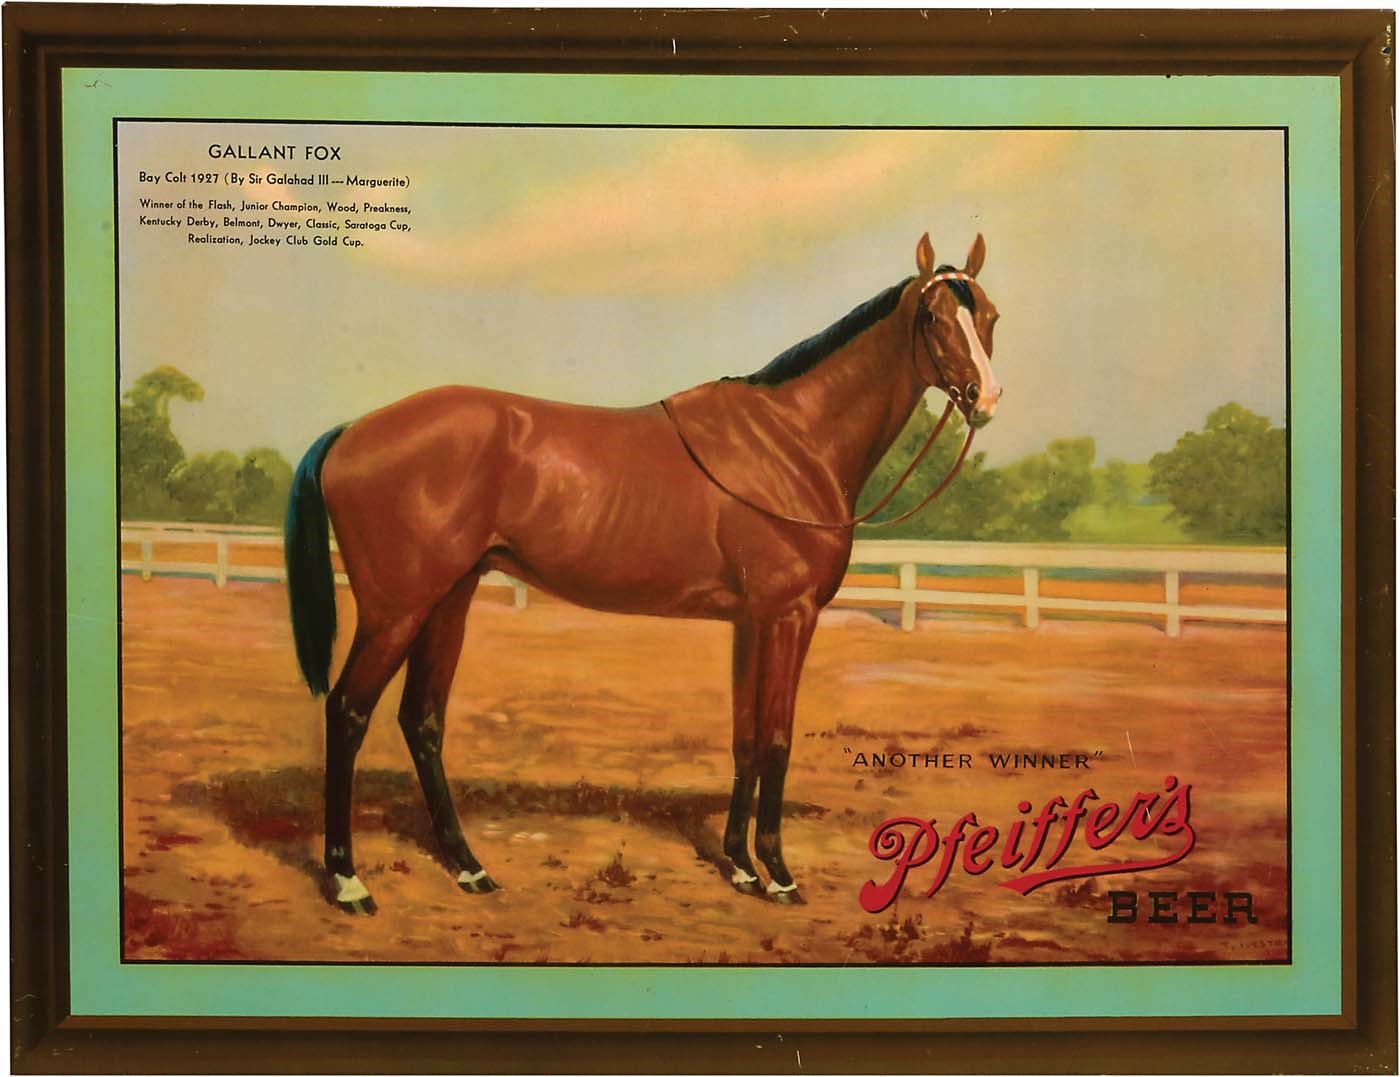 Finest Known 1939 Gallant Fox Pfeiffer Beer Litho Tin Sign